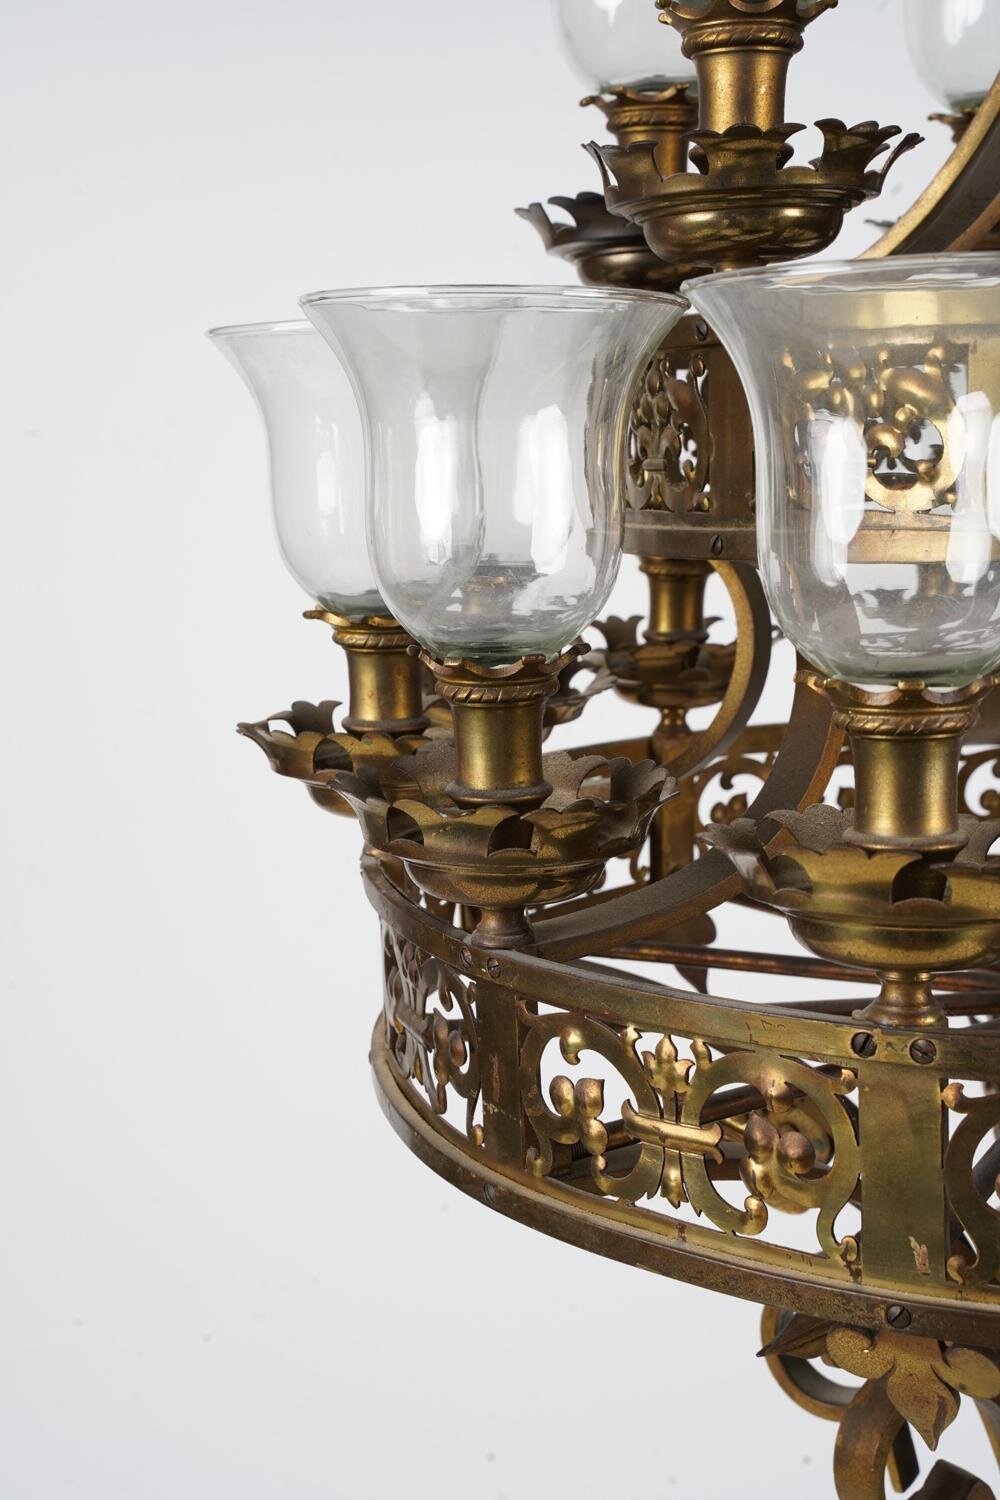 AL1-002: GOTHIC REVIVAL STYLE CHANDELIER